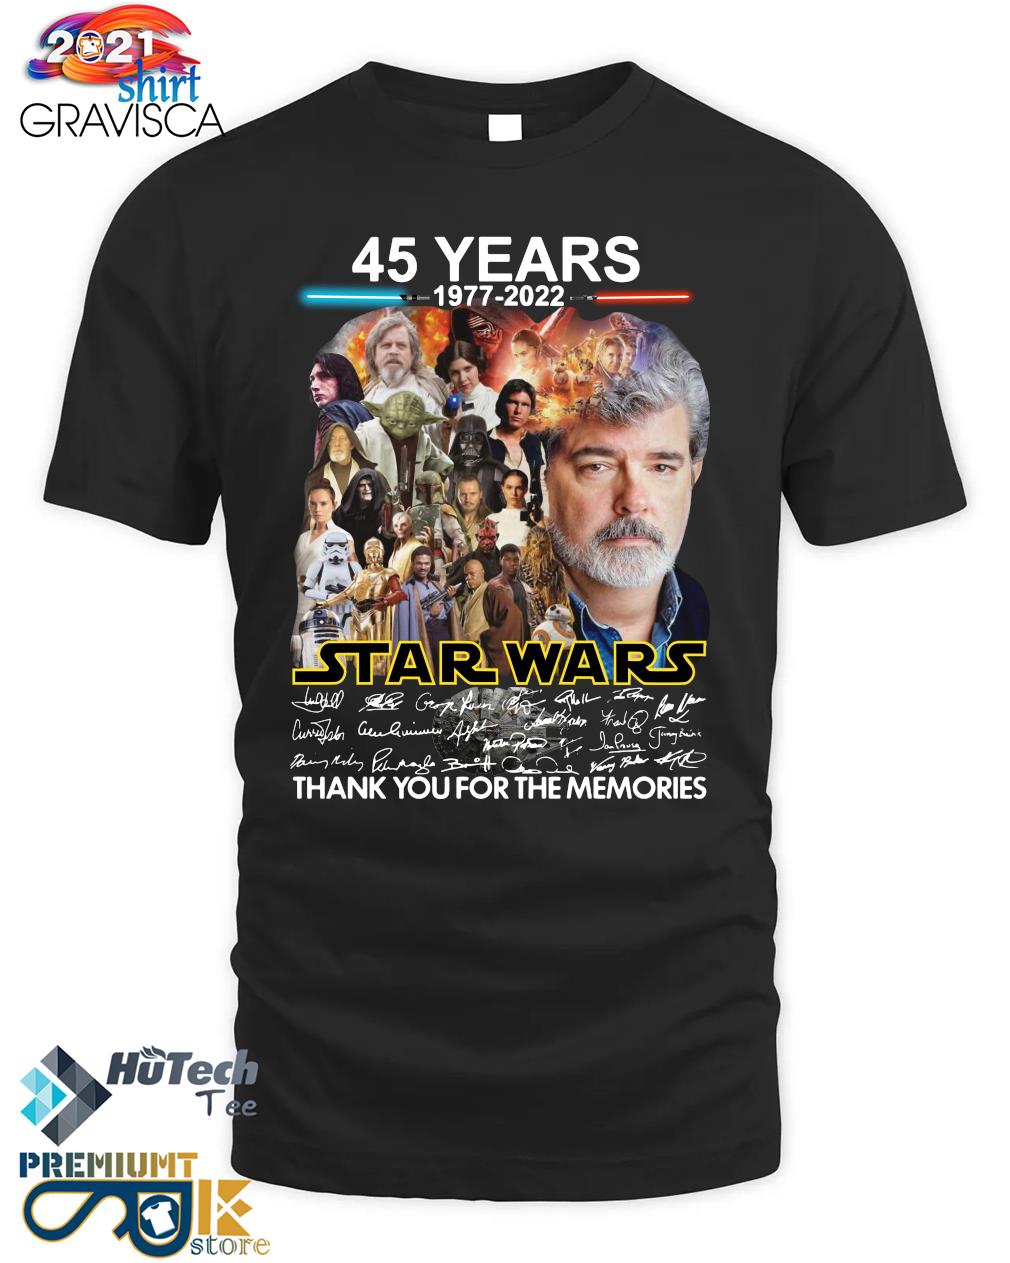 45 Years 1977 2022 Star Wars signatures thank you for the memories shirt